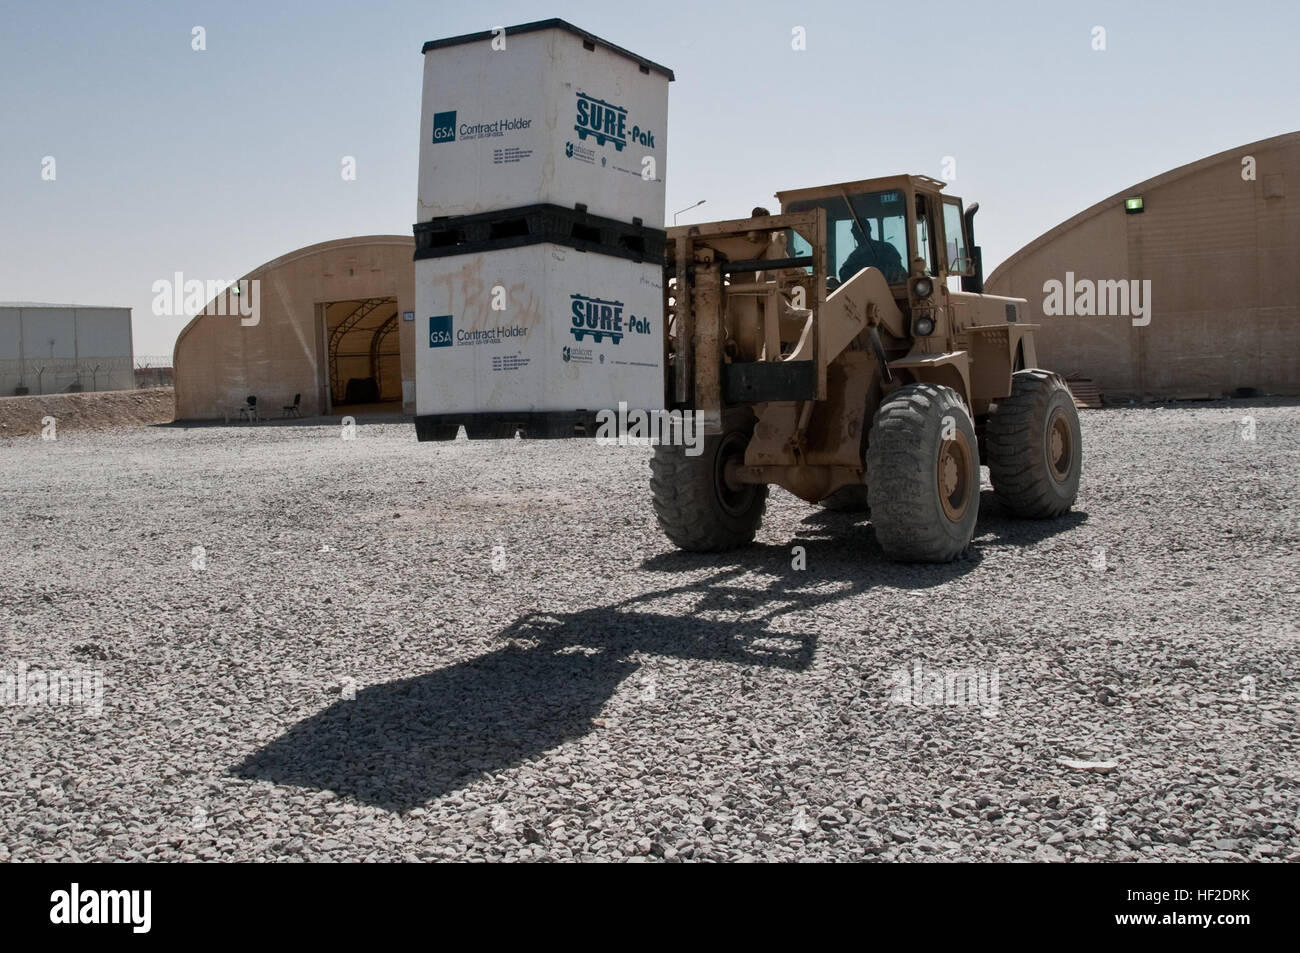 Spc. Johnathon Keeton, a native of Ft. Worth, Texas, who serves with the 354th Medical Logistics Company, 145th Medical Logistics Battalion drives a forklift loaded with containers full of medical supplies to put on a truck on Kandahar Airfield, Afghanistan, Aug. 17, 2014. The supplies were categorized as foreign excess personal property through the U.S. downgrade of medical facilities throughout Regional Command-South and were therefore available to be donated to Mirwais Hospital in Kandahar to help treat locals and Afghan National Security Forces in the region. Excess medical equipment donat Stock Photo